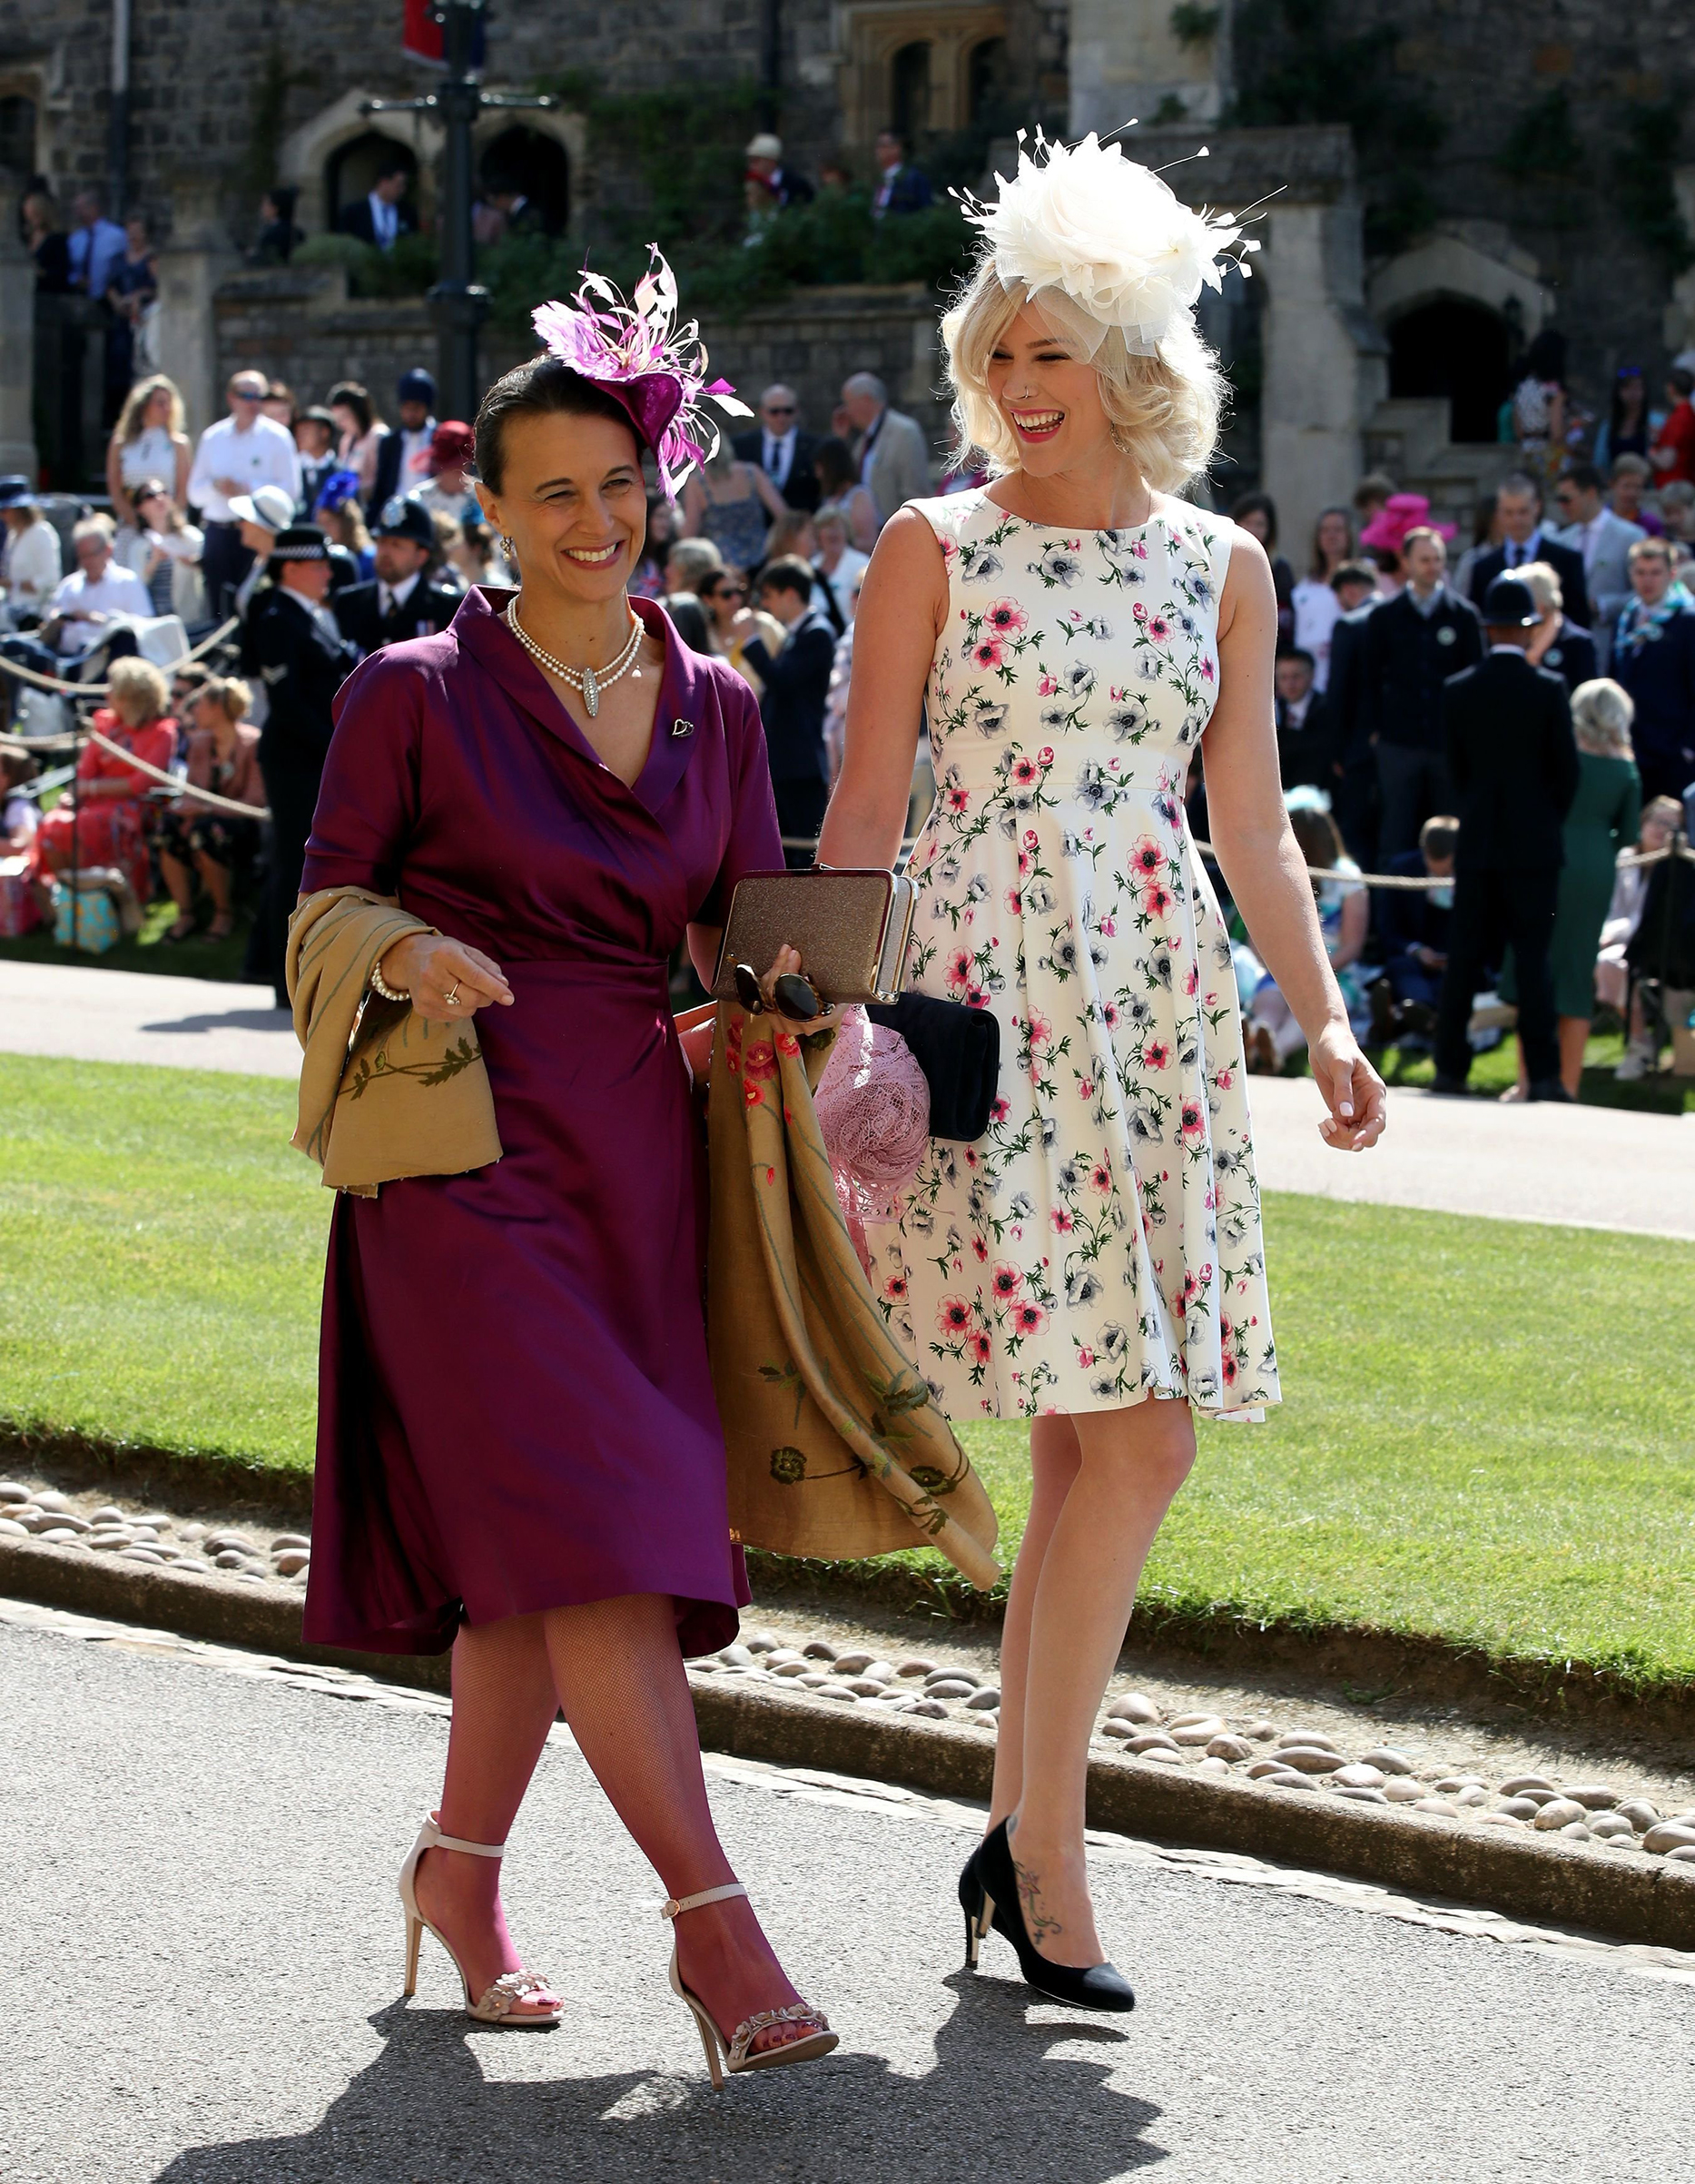 British singer Joss Stone (right) arrives for the wedding ceremony of Britain's Prince Harry and Meghan Markle at St George's Chapel, Windsor Castle, in Windsor, on May 19, 2018.